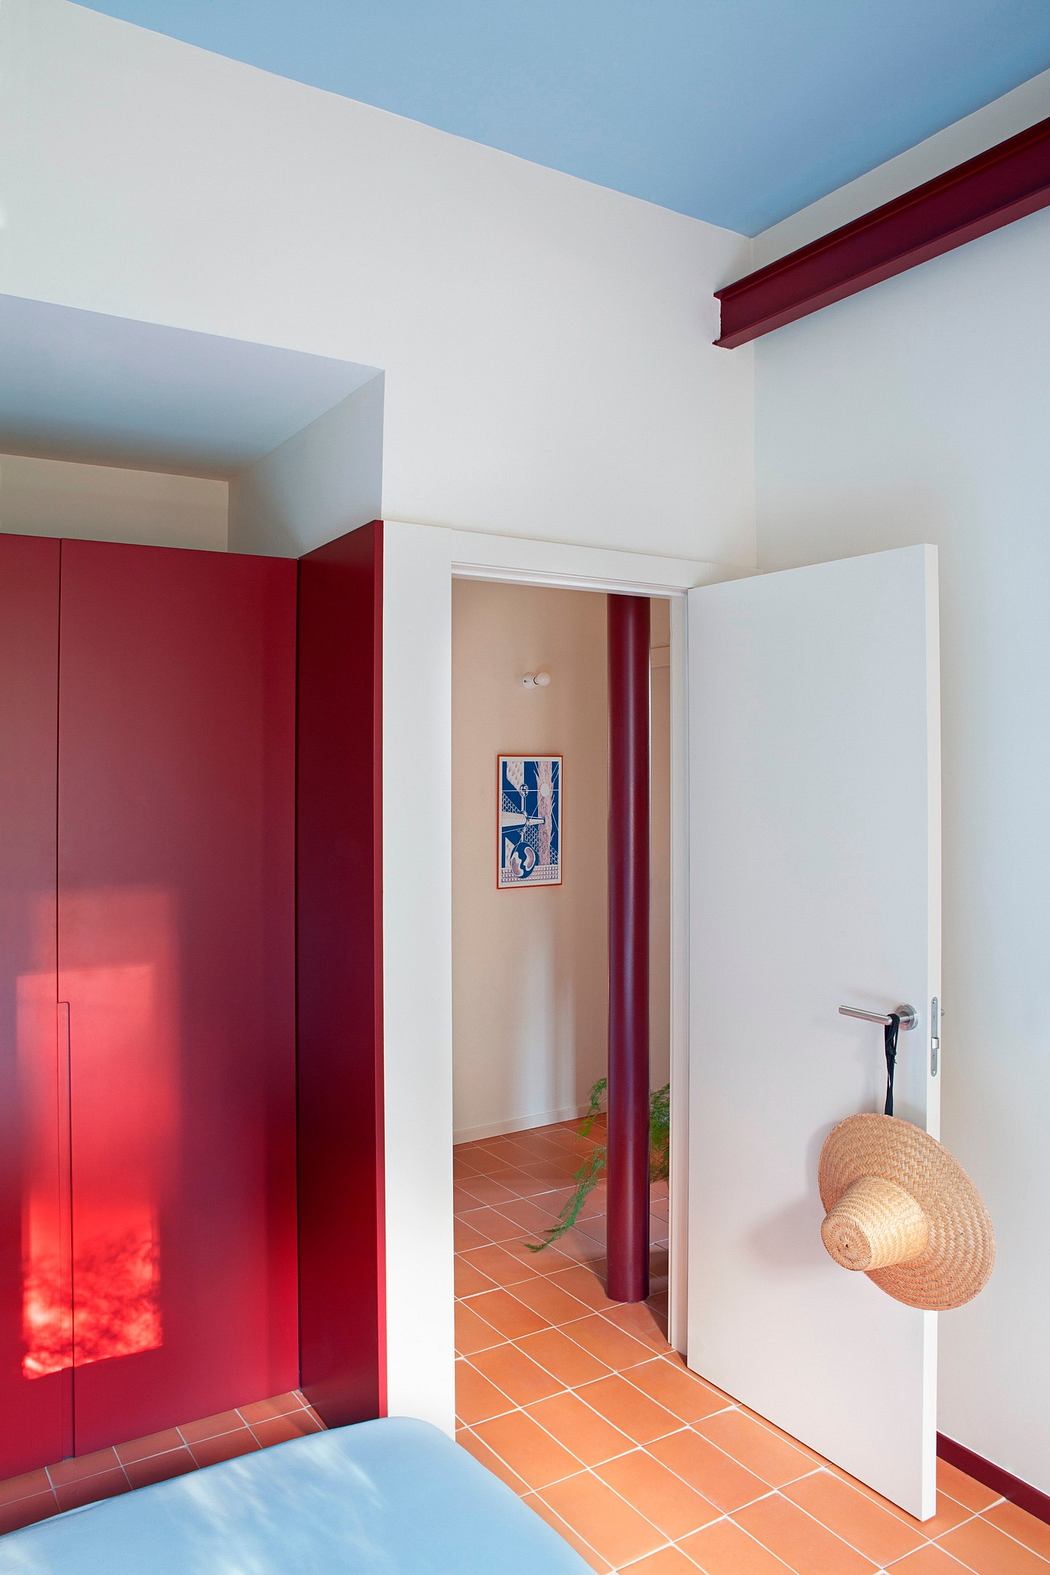 Bright hallway with red accents and terracotta floor tiles.